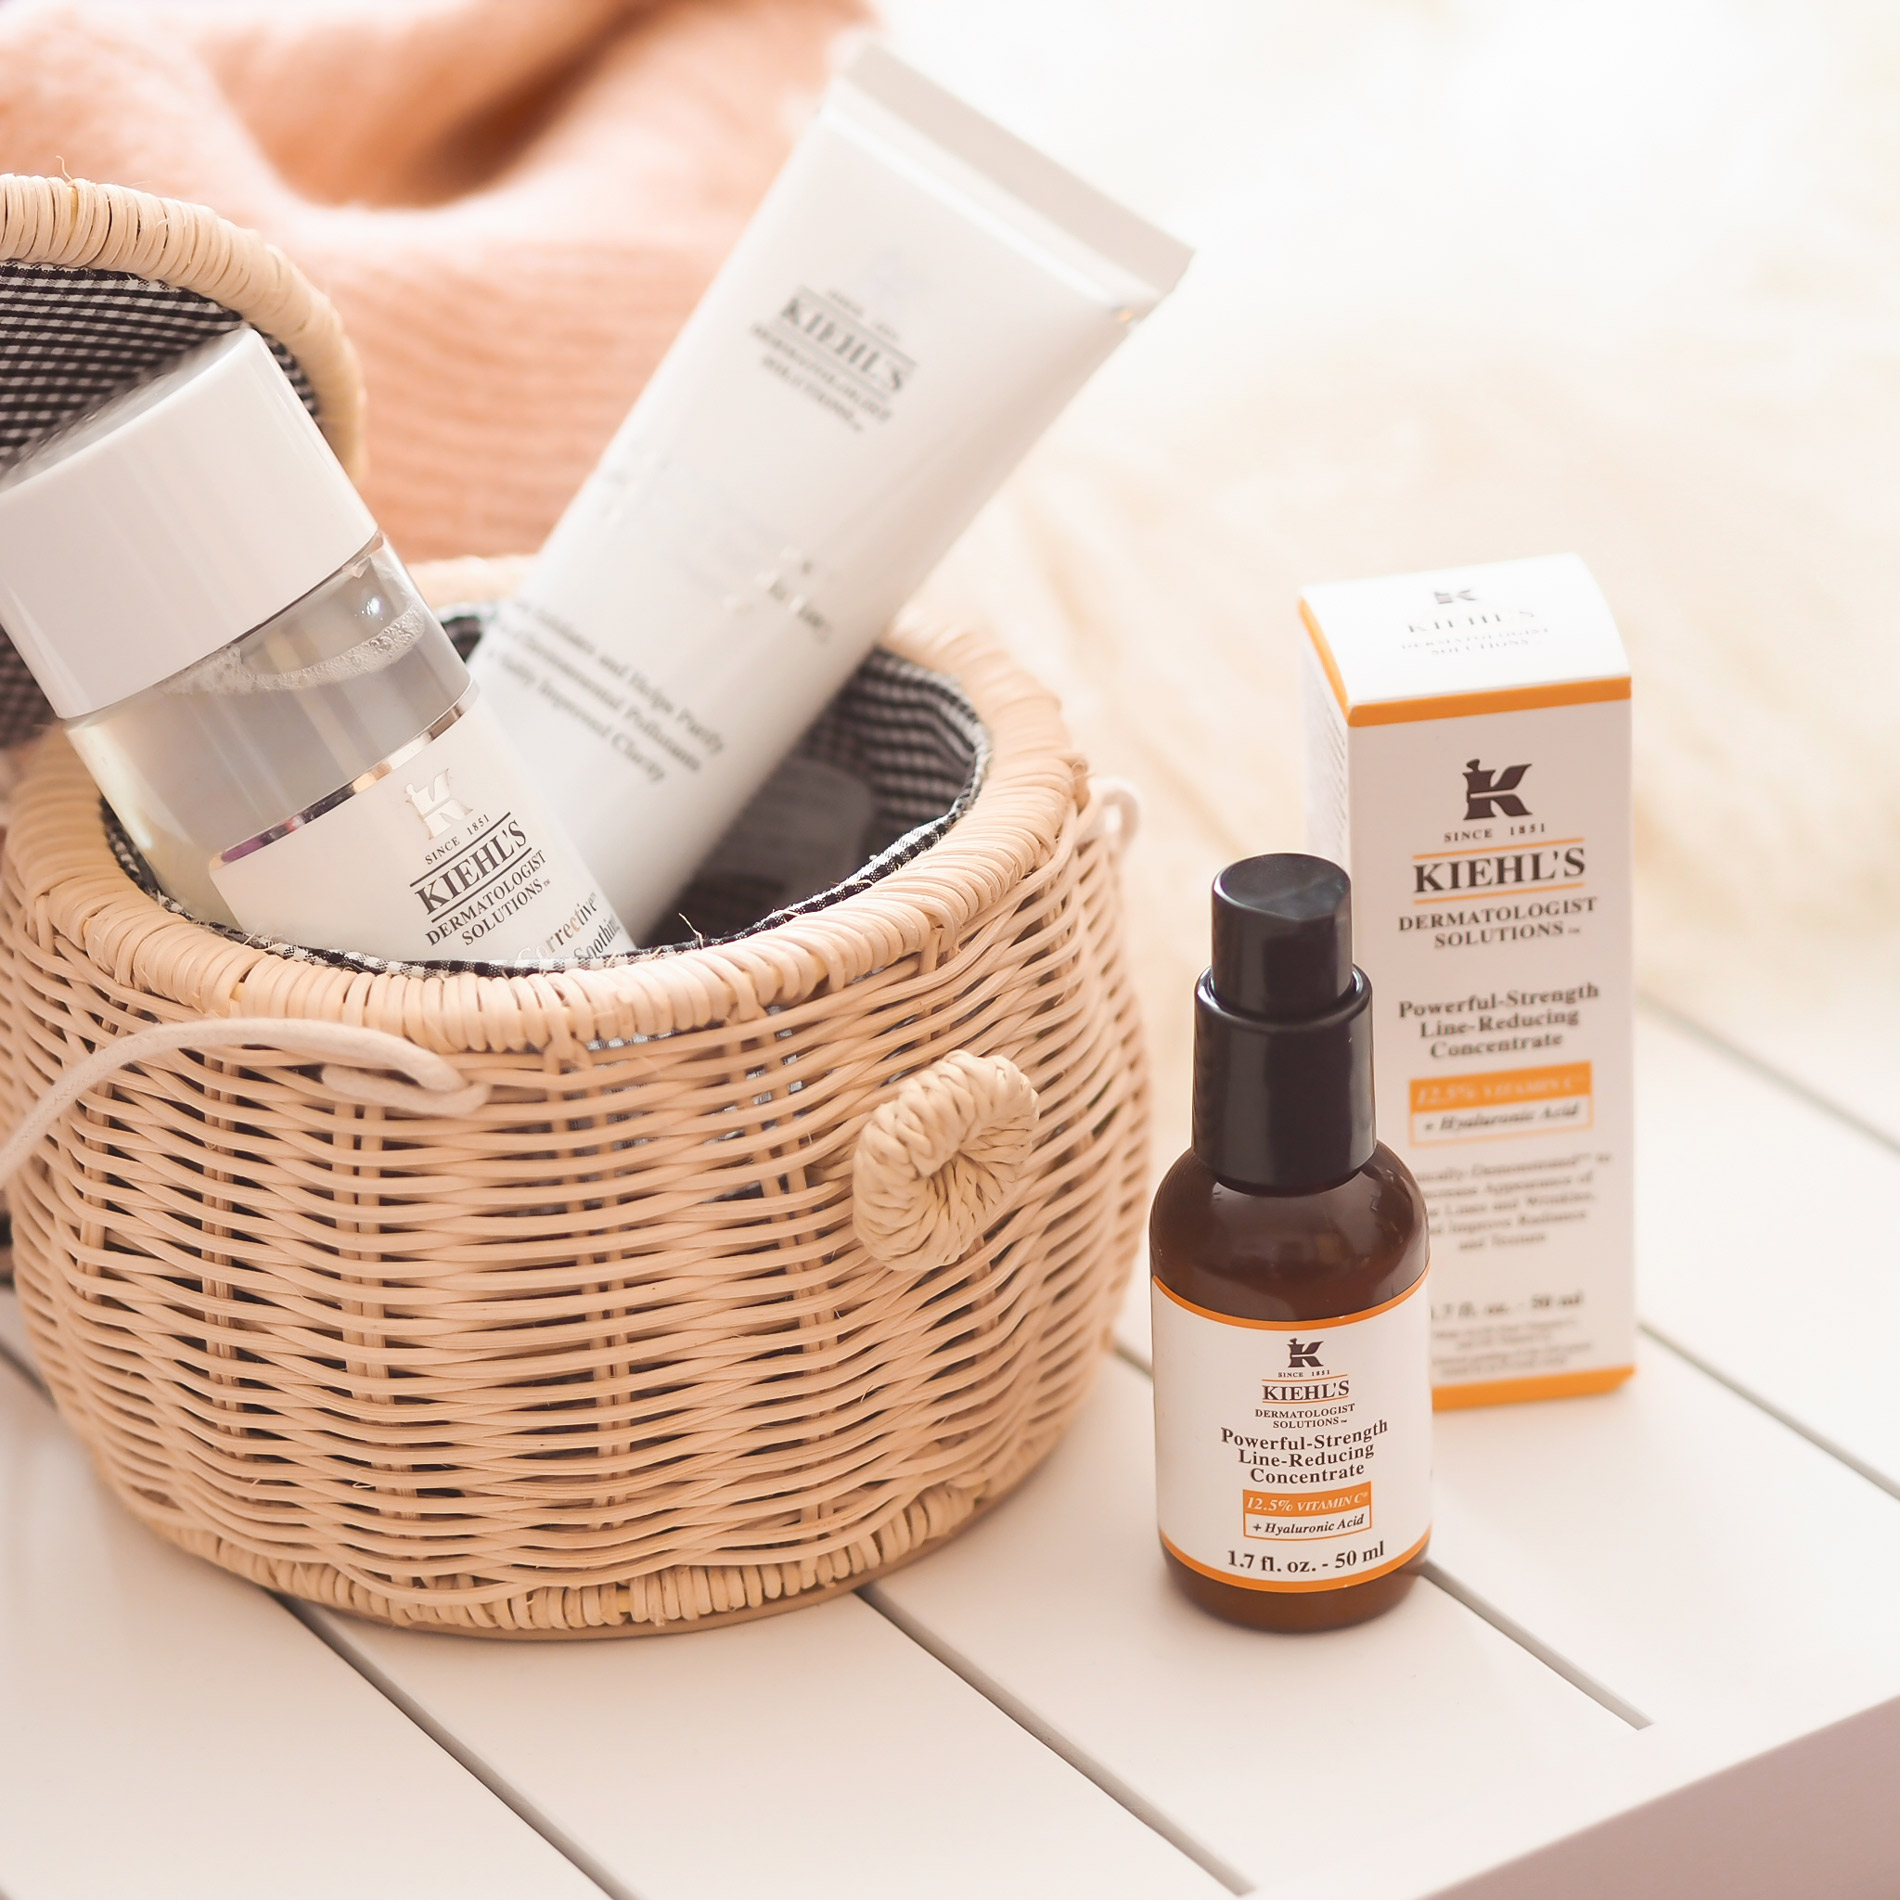 Kiehls Powerful Strength Line Reducing Concentrate new formula | kiehls vitamin C serum review | kiehls skincare review | Kiehls Clearly Corrective Brightening & Soothing Treatment Water